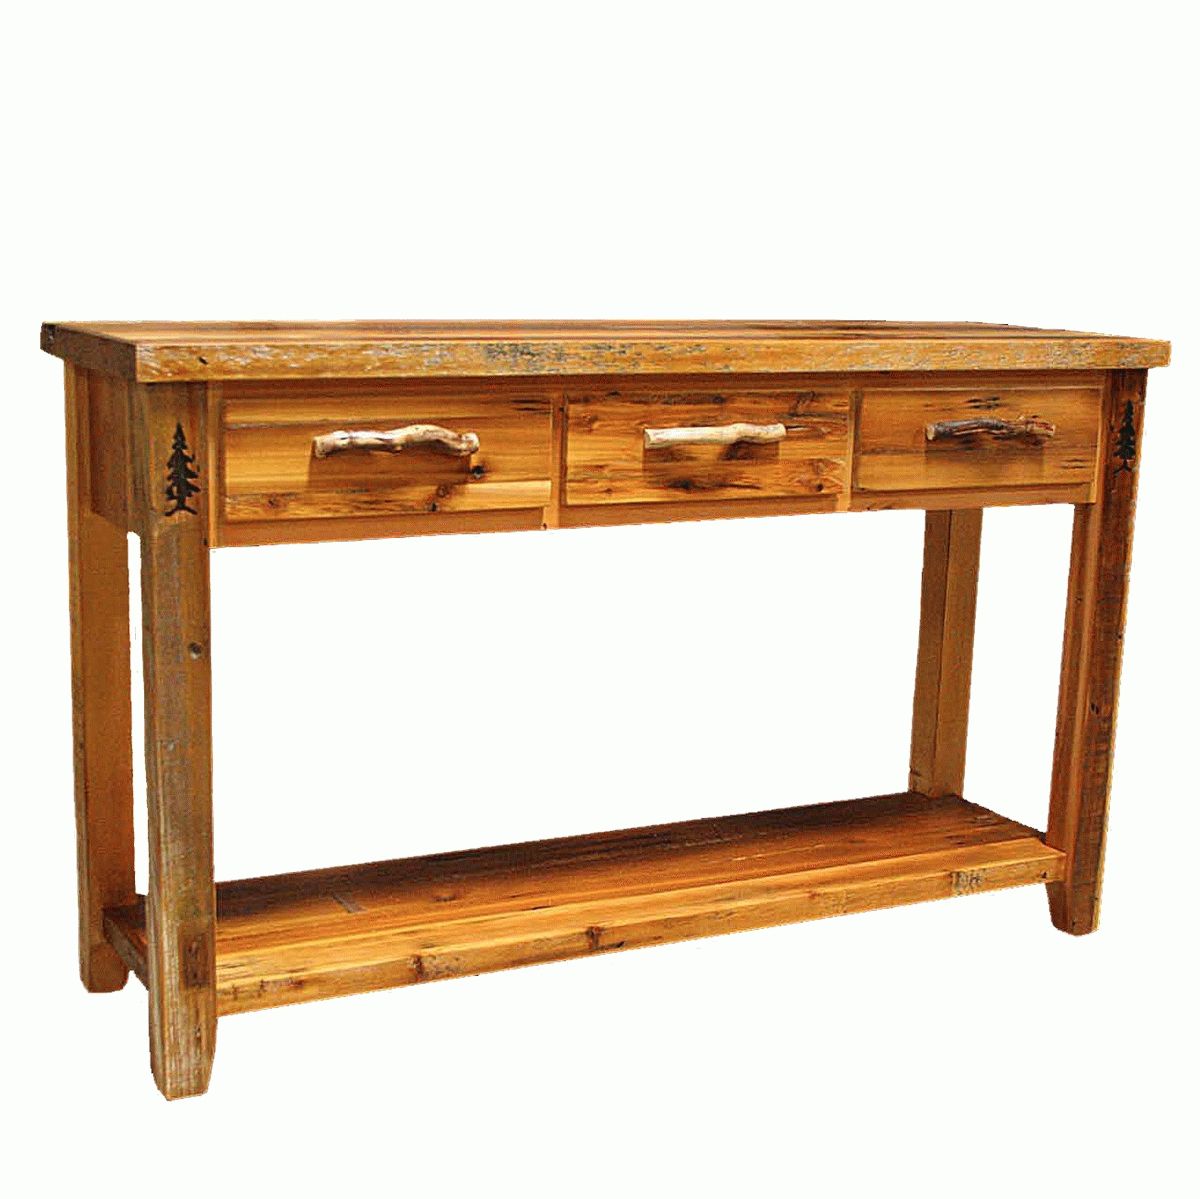 Barnwood 3 Drawer Sofa Table With Shelf With Tree Carving Regarding Sofa Table Drawers (View 9 of 30)